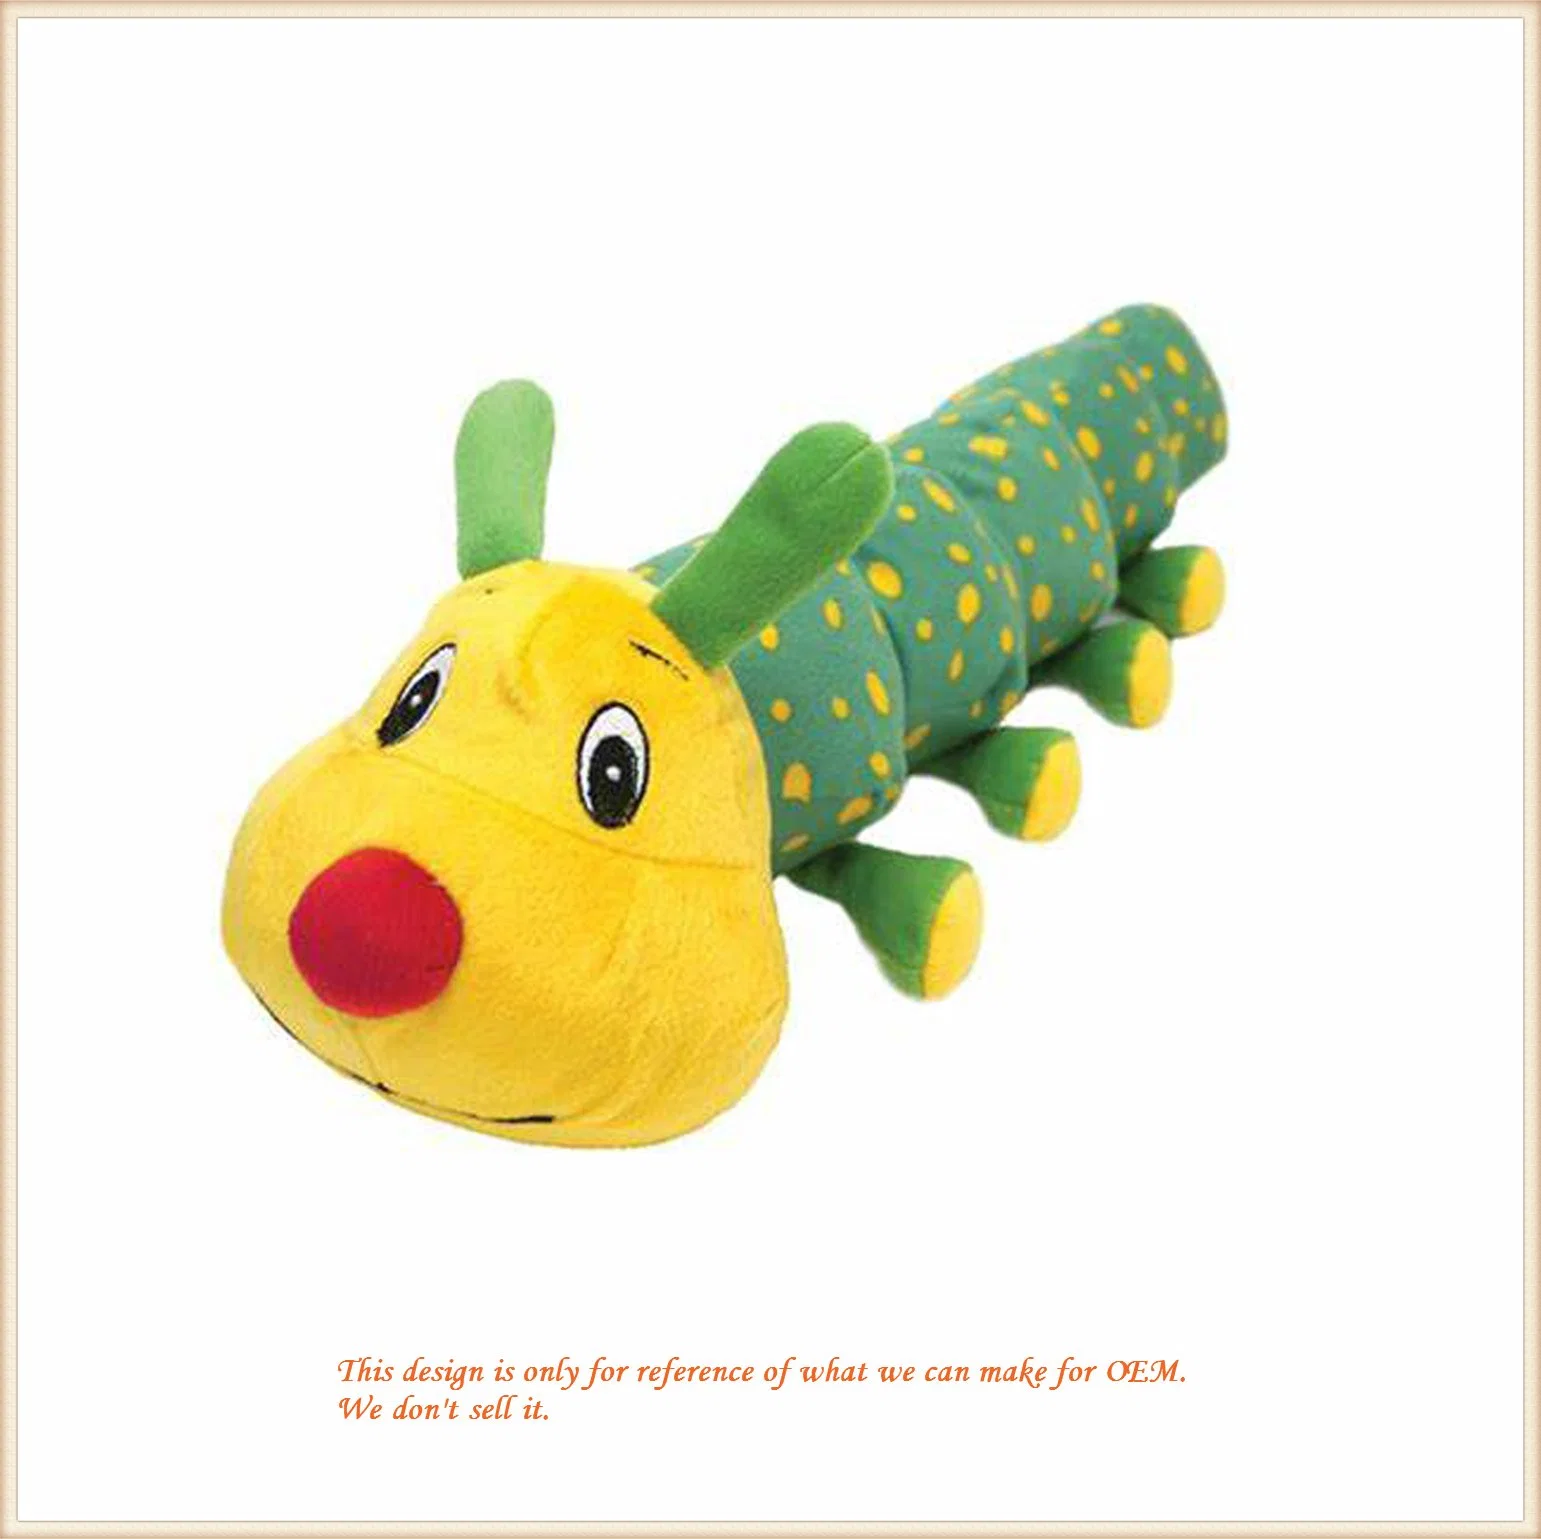 Caterpillar Plush Pet Toy Soft Animal Toys for Home Decoration